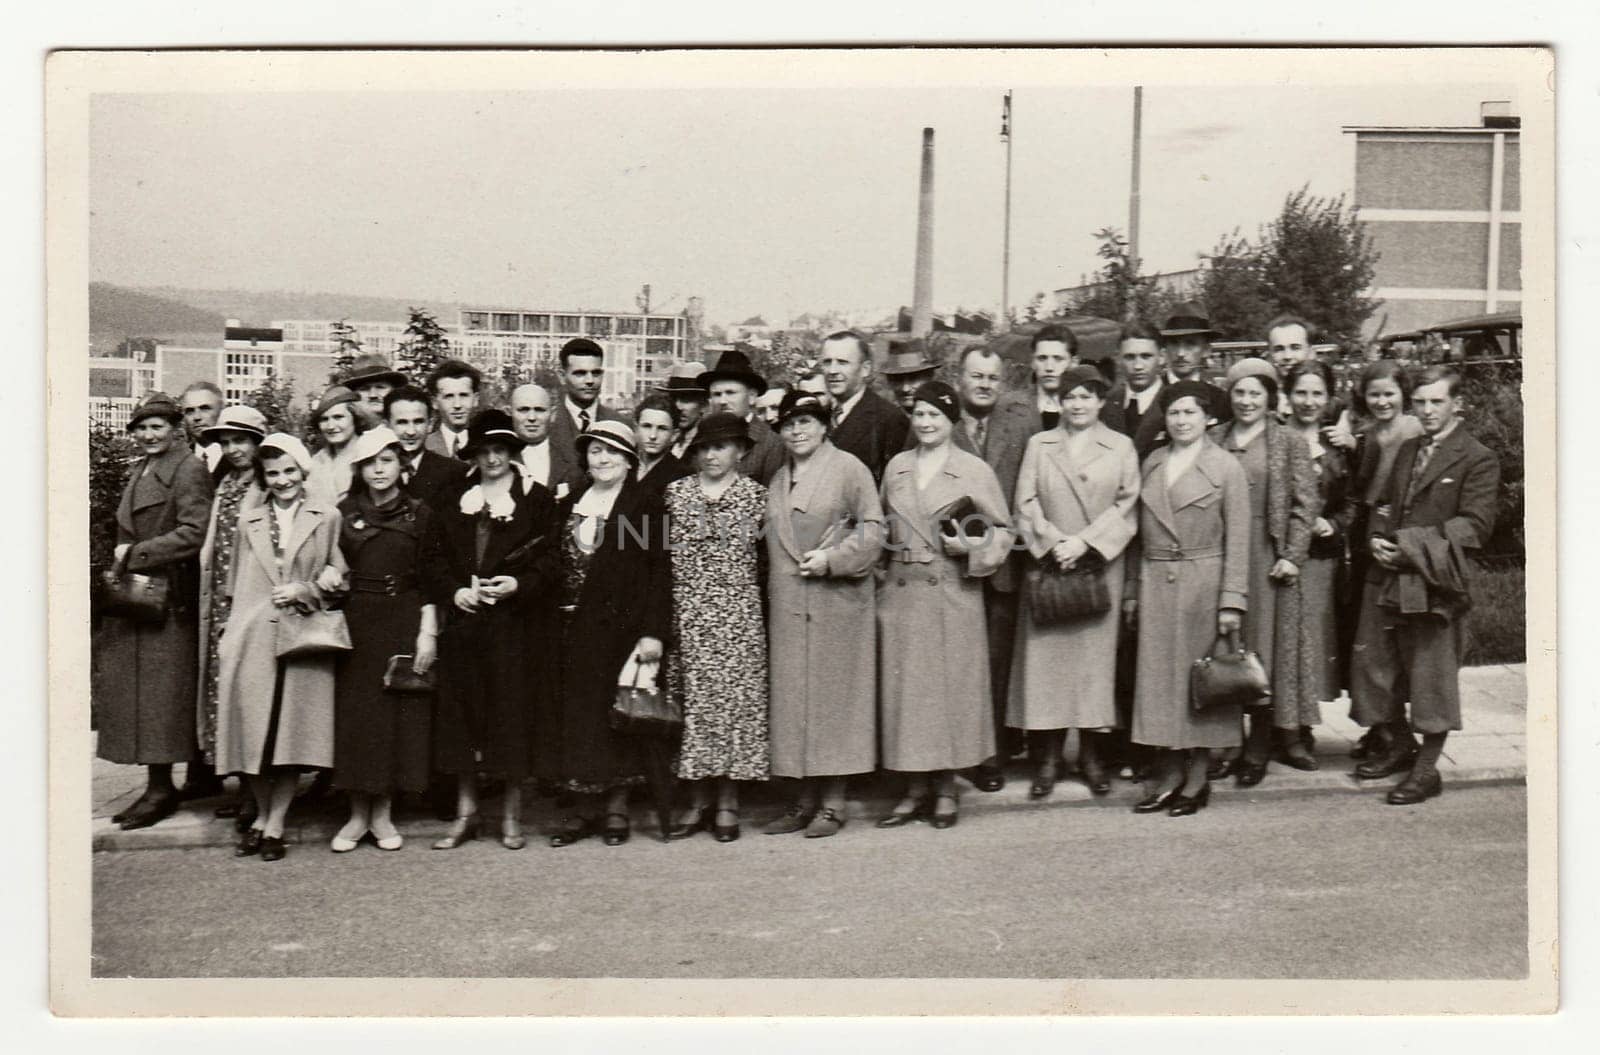 Vintage photo shows group of people in front of Bata factories, on August 15, 1934. by roman_nerud